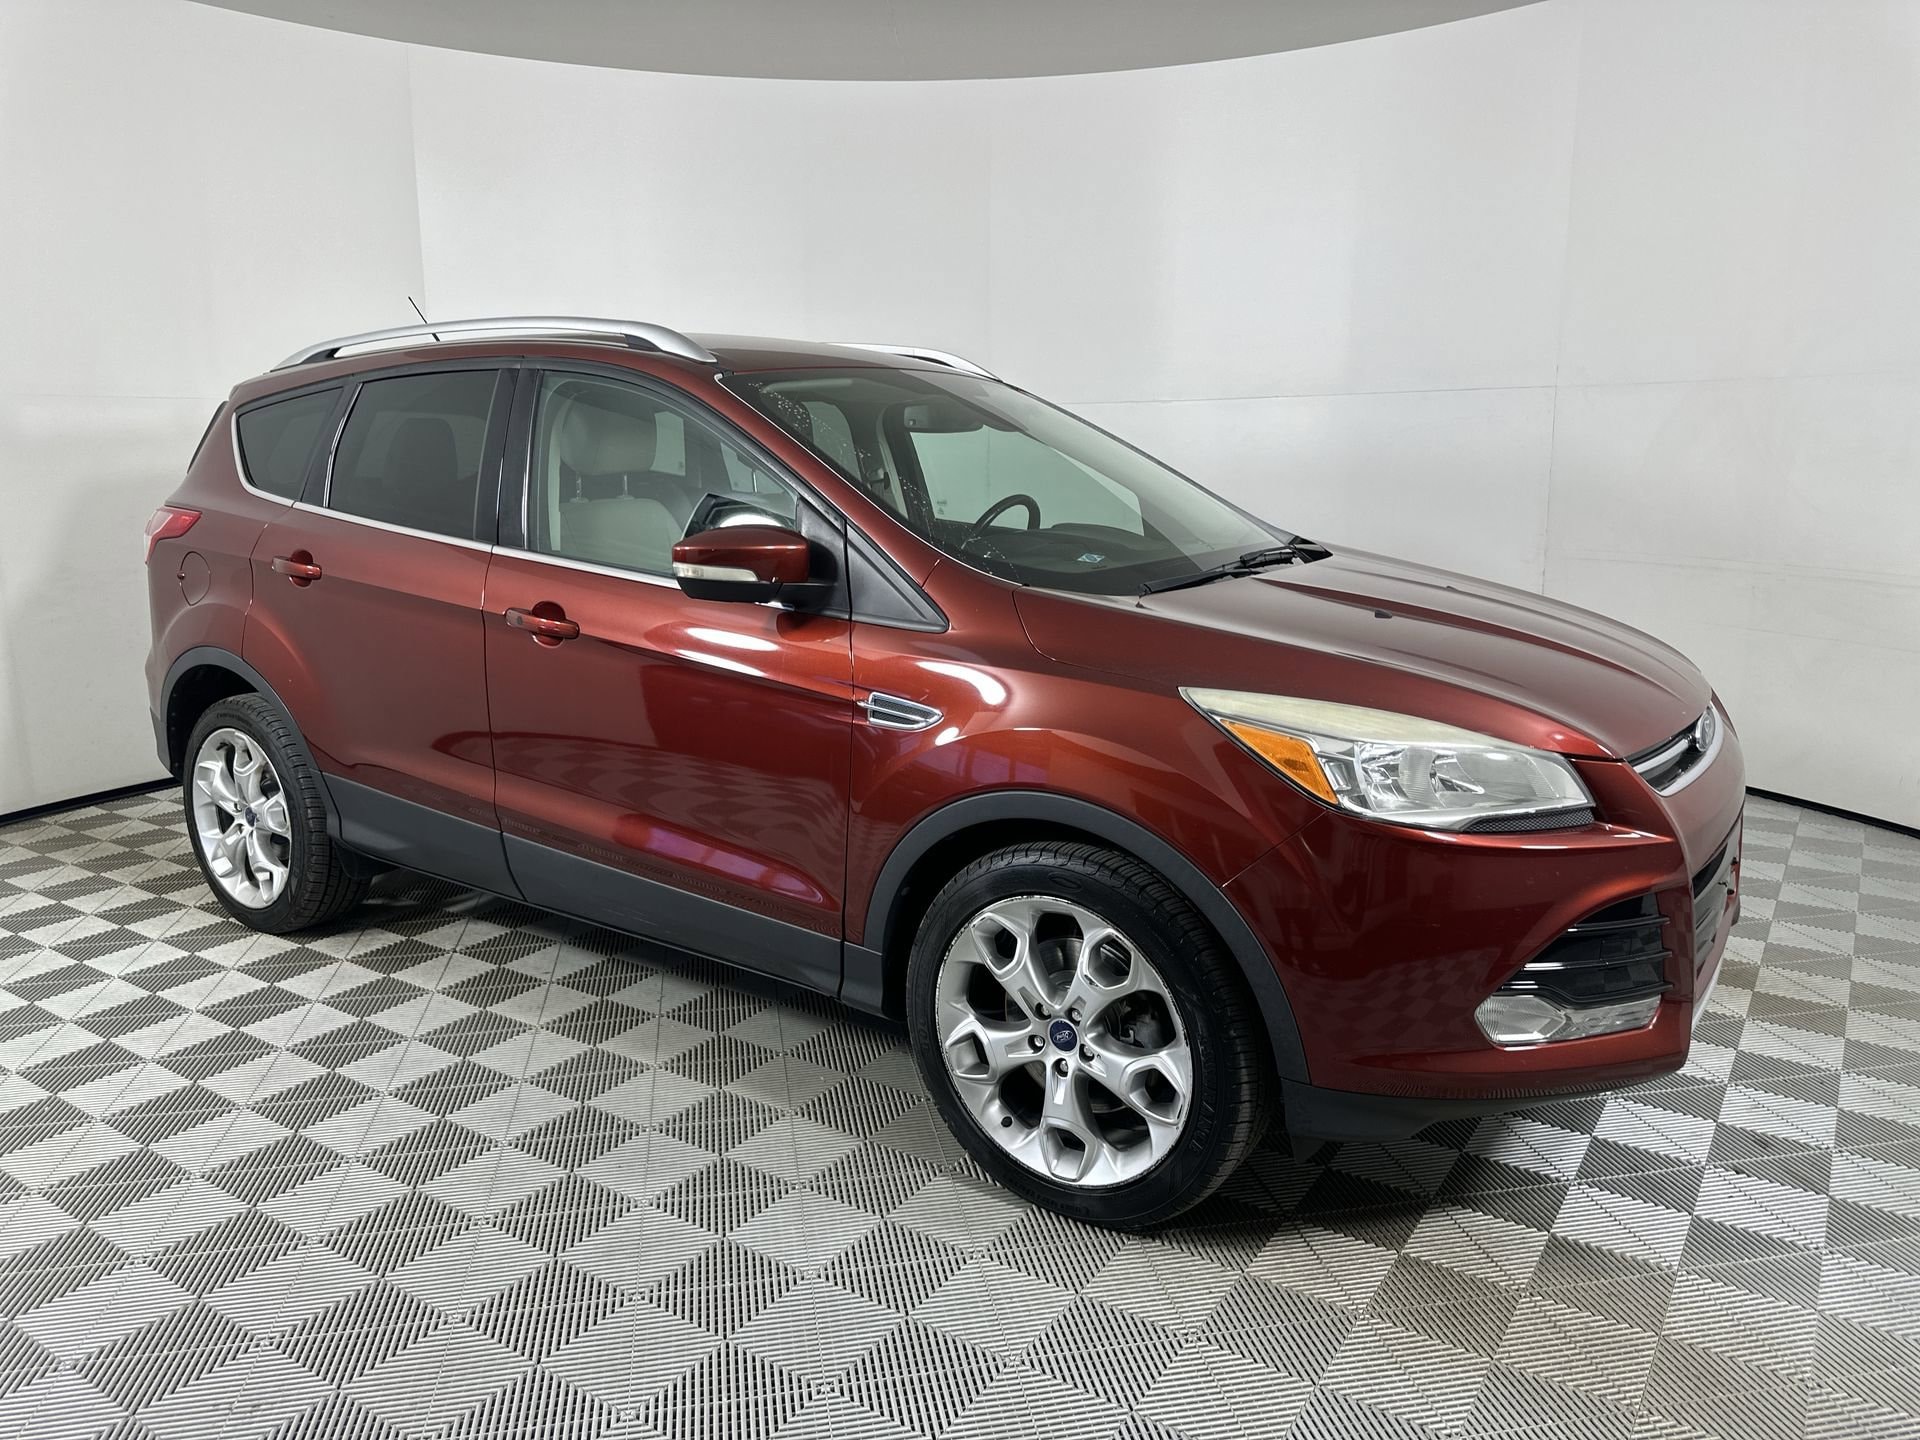 Used 2014 Ford Escape Titanium with VIN 1FMCU9J91EUA67981 for sale in Parkersburg, WV